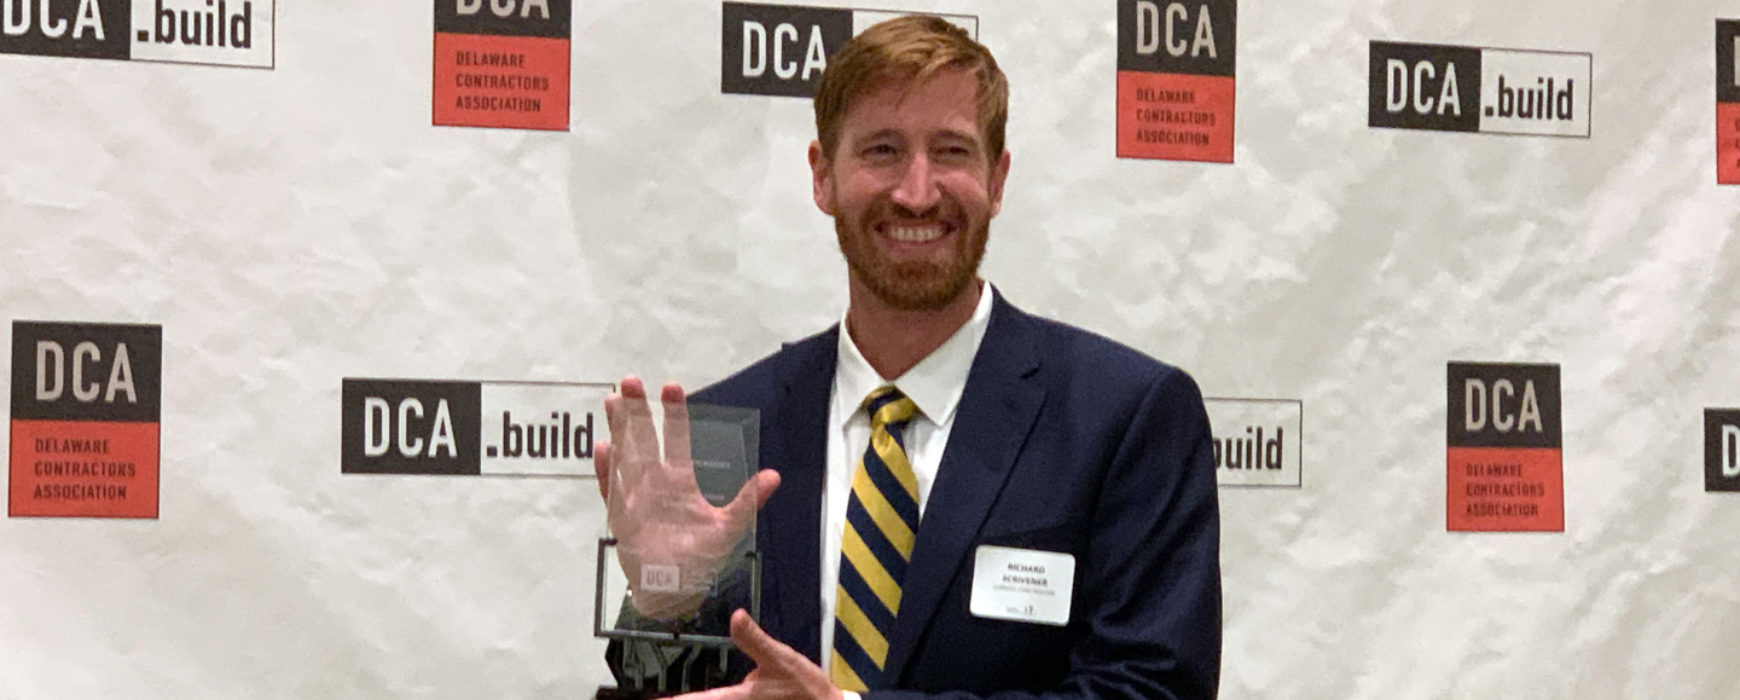 Richard Scrivener Recognized by DCA for Careers in Construction Month